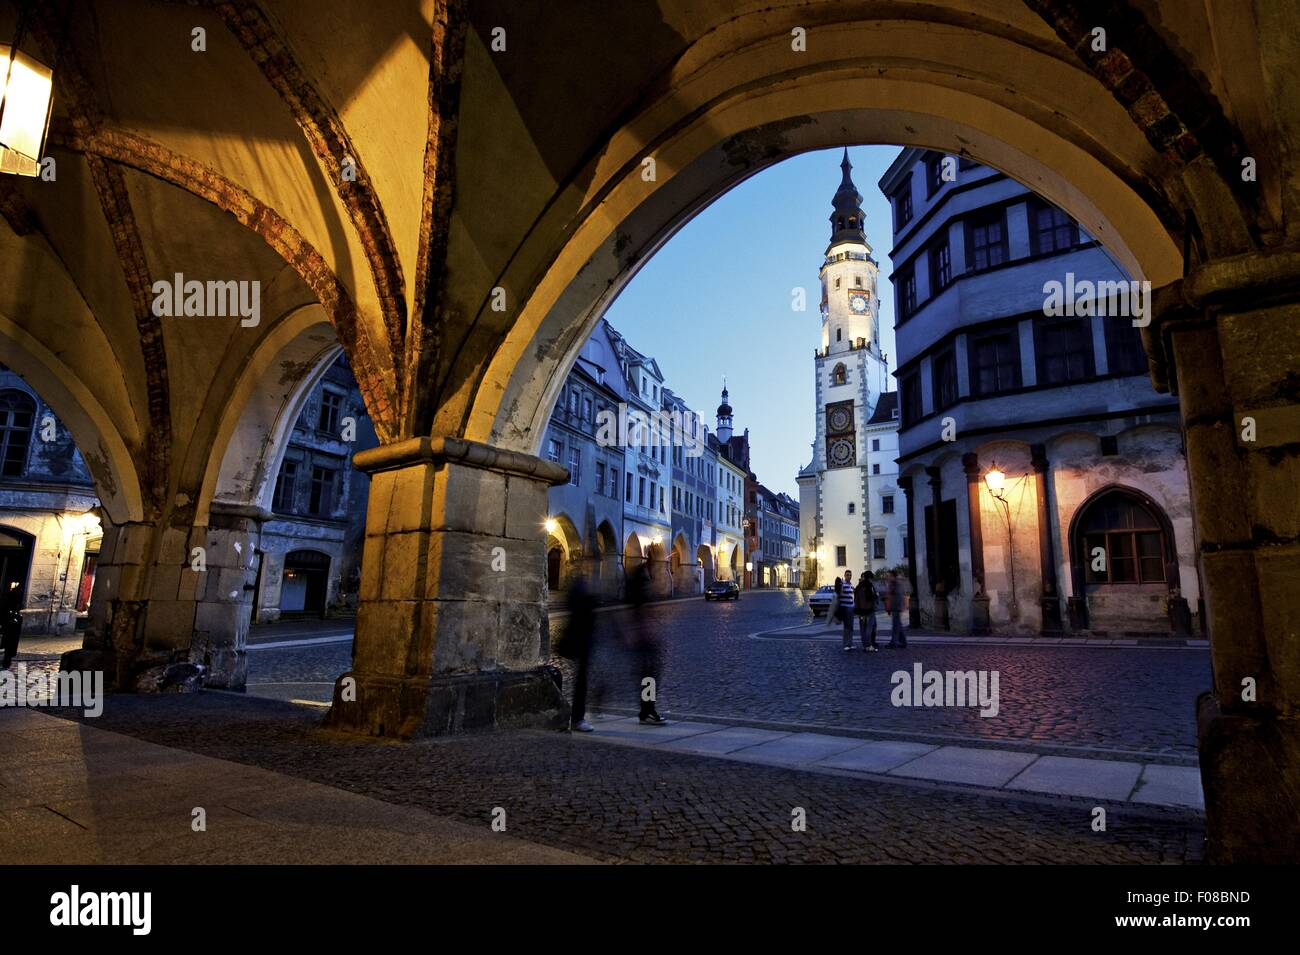 People on streets at evening in Gorlitz, Saxony, Germany Stock Photo